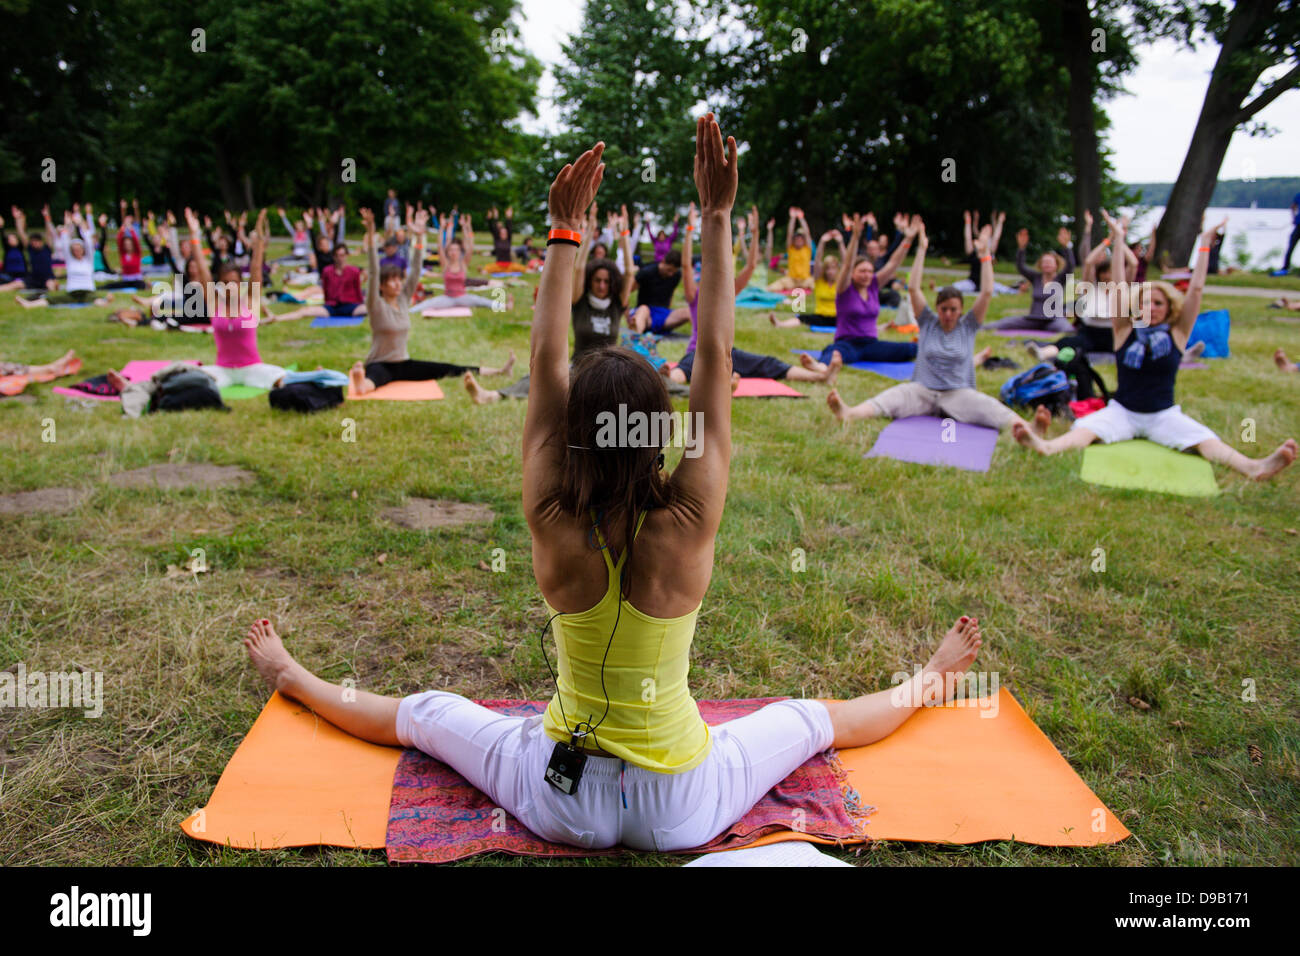 Participants moves at the 9th Berlin Yoga Festival at Wannsee in Berlin, Germany, 16 June 2013. The Berlin Yoga Festival is Europe's largest yoga event.  Photo: picture alliance / Robert Schlesinger Stock Photo